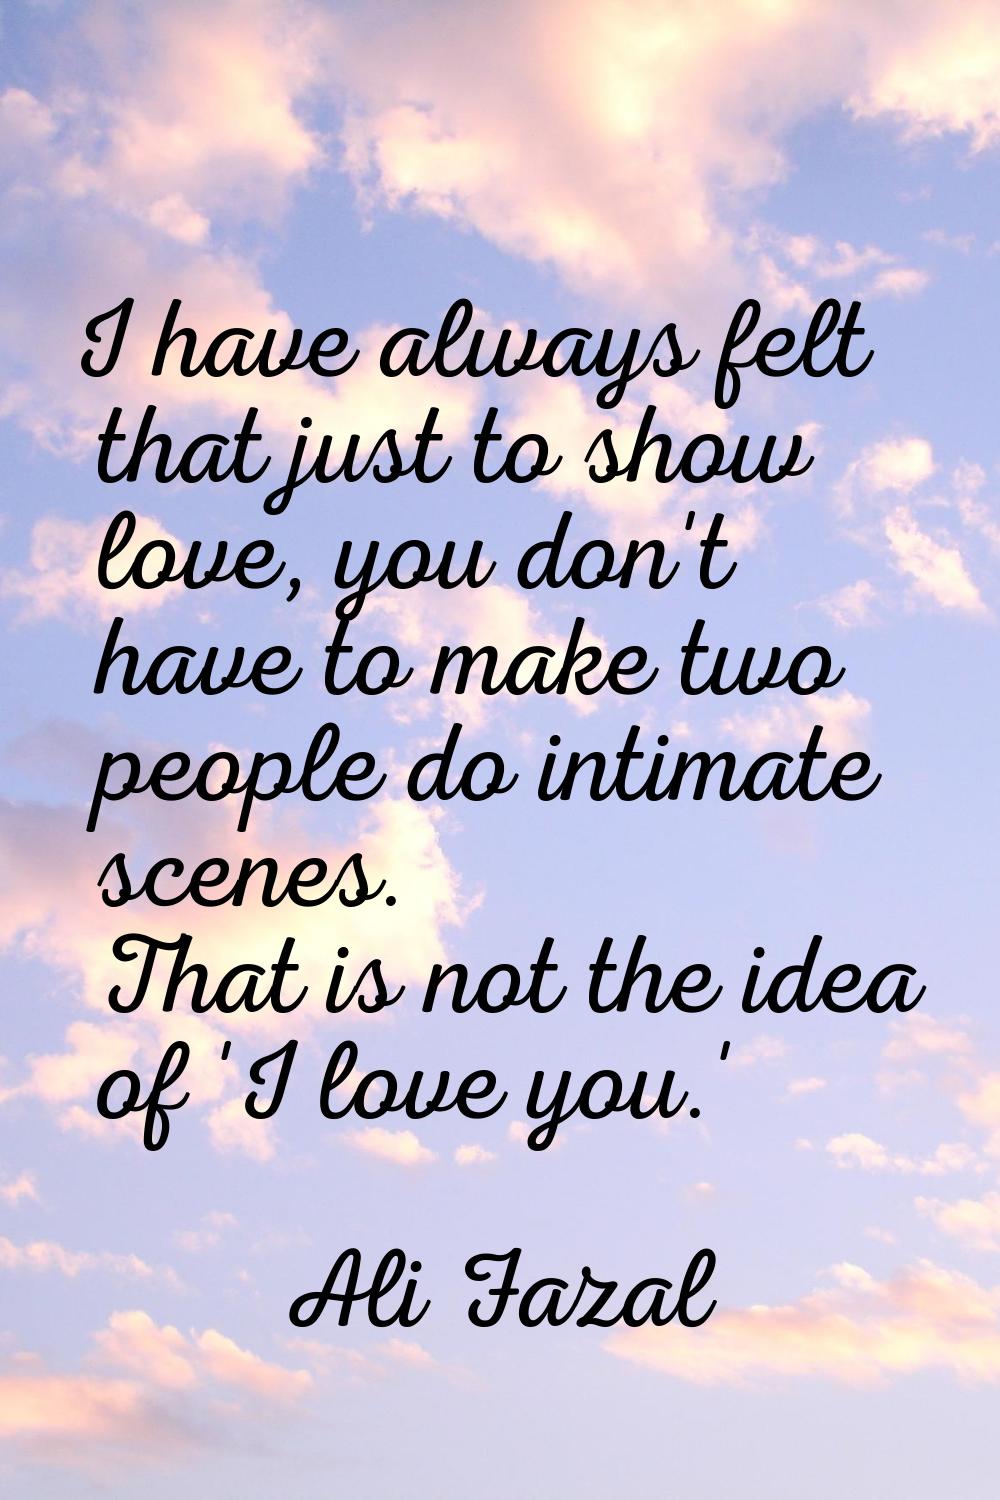 I have always felt that just to show love, you don't have to make two people do intimate scenes. Th